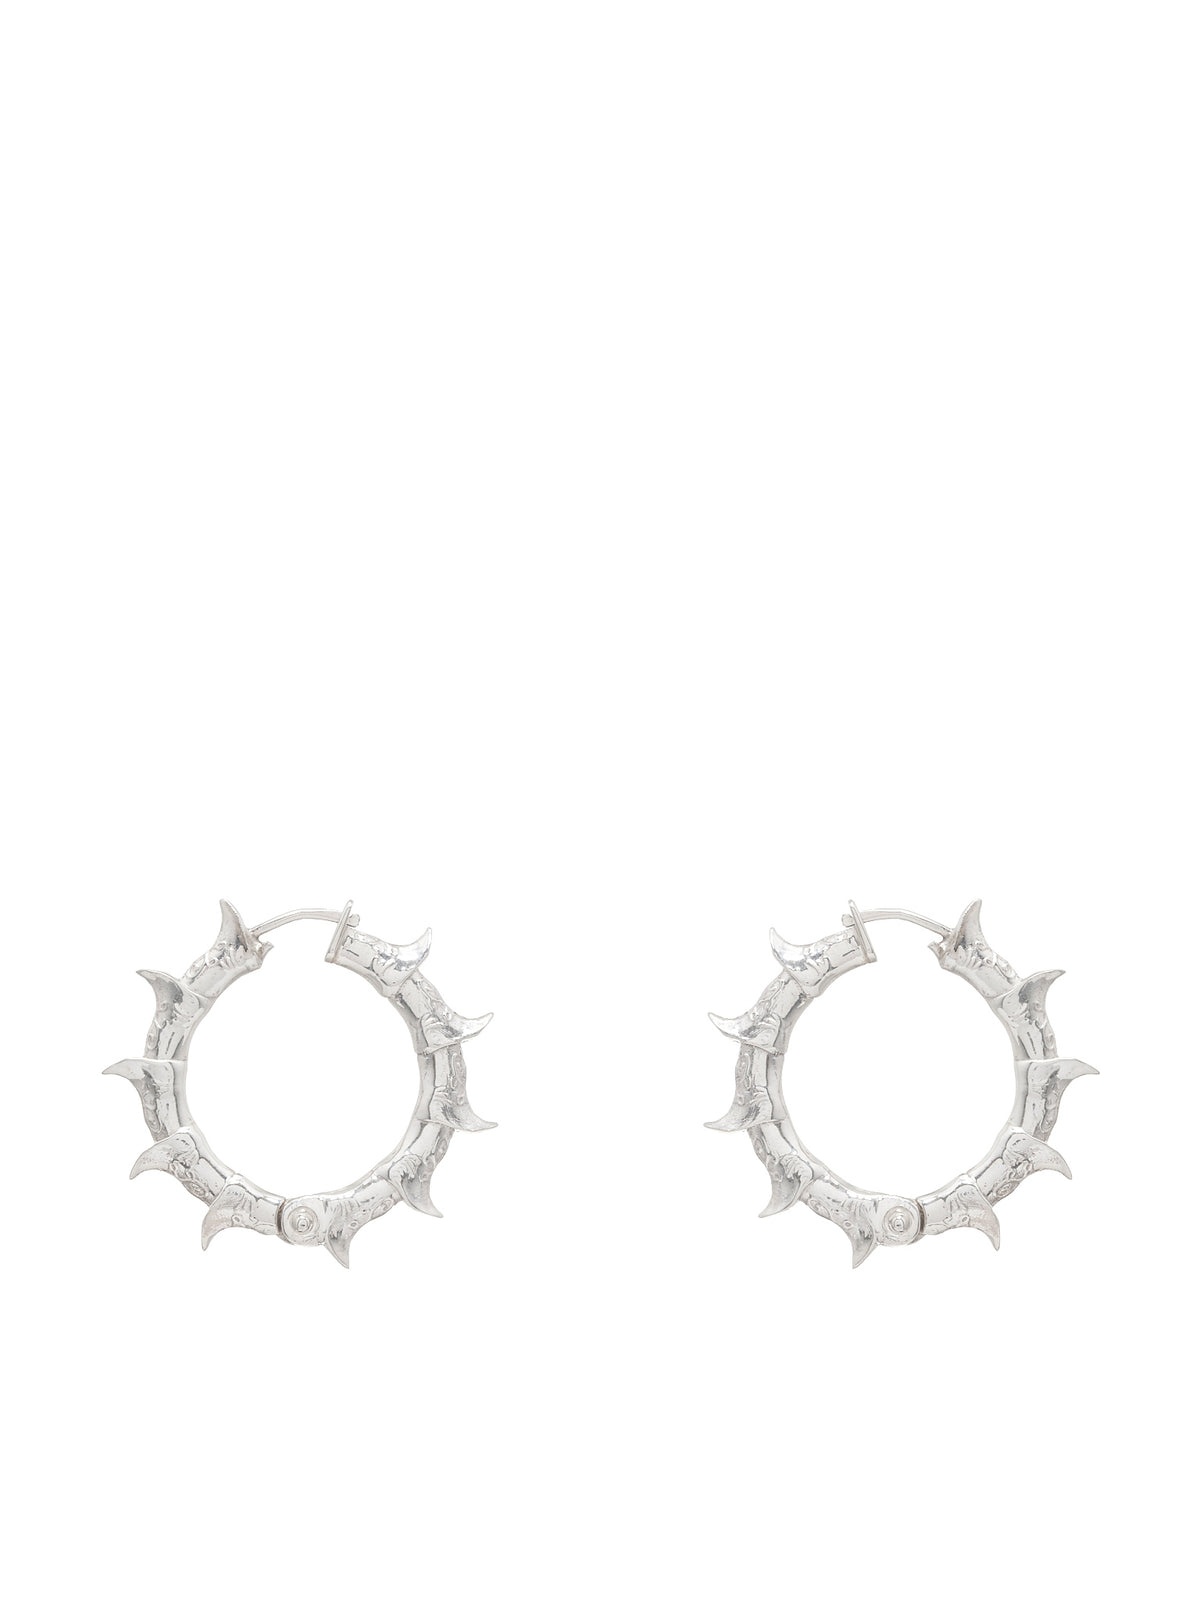 Babis Boots Earrings (BABIS-BOOTS-HOOPS-L-PL-SILVER)